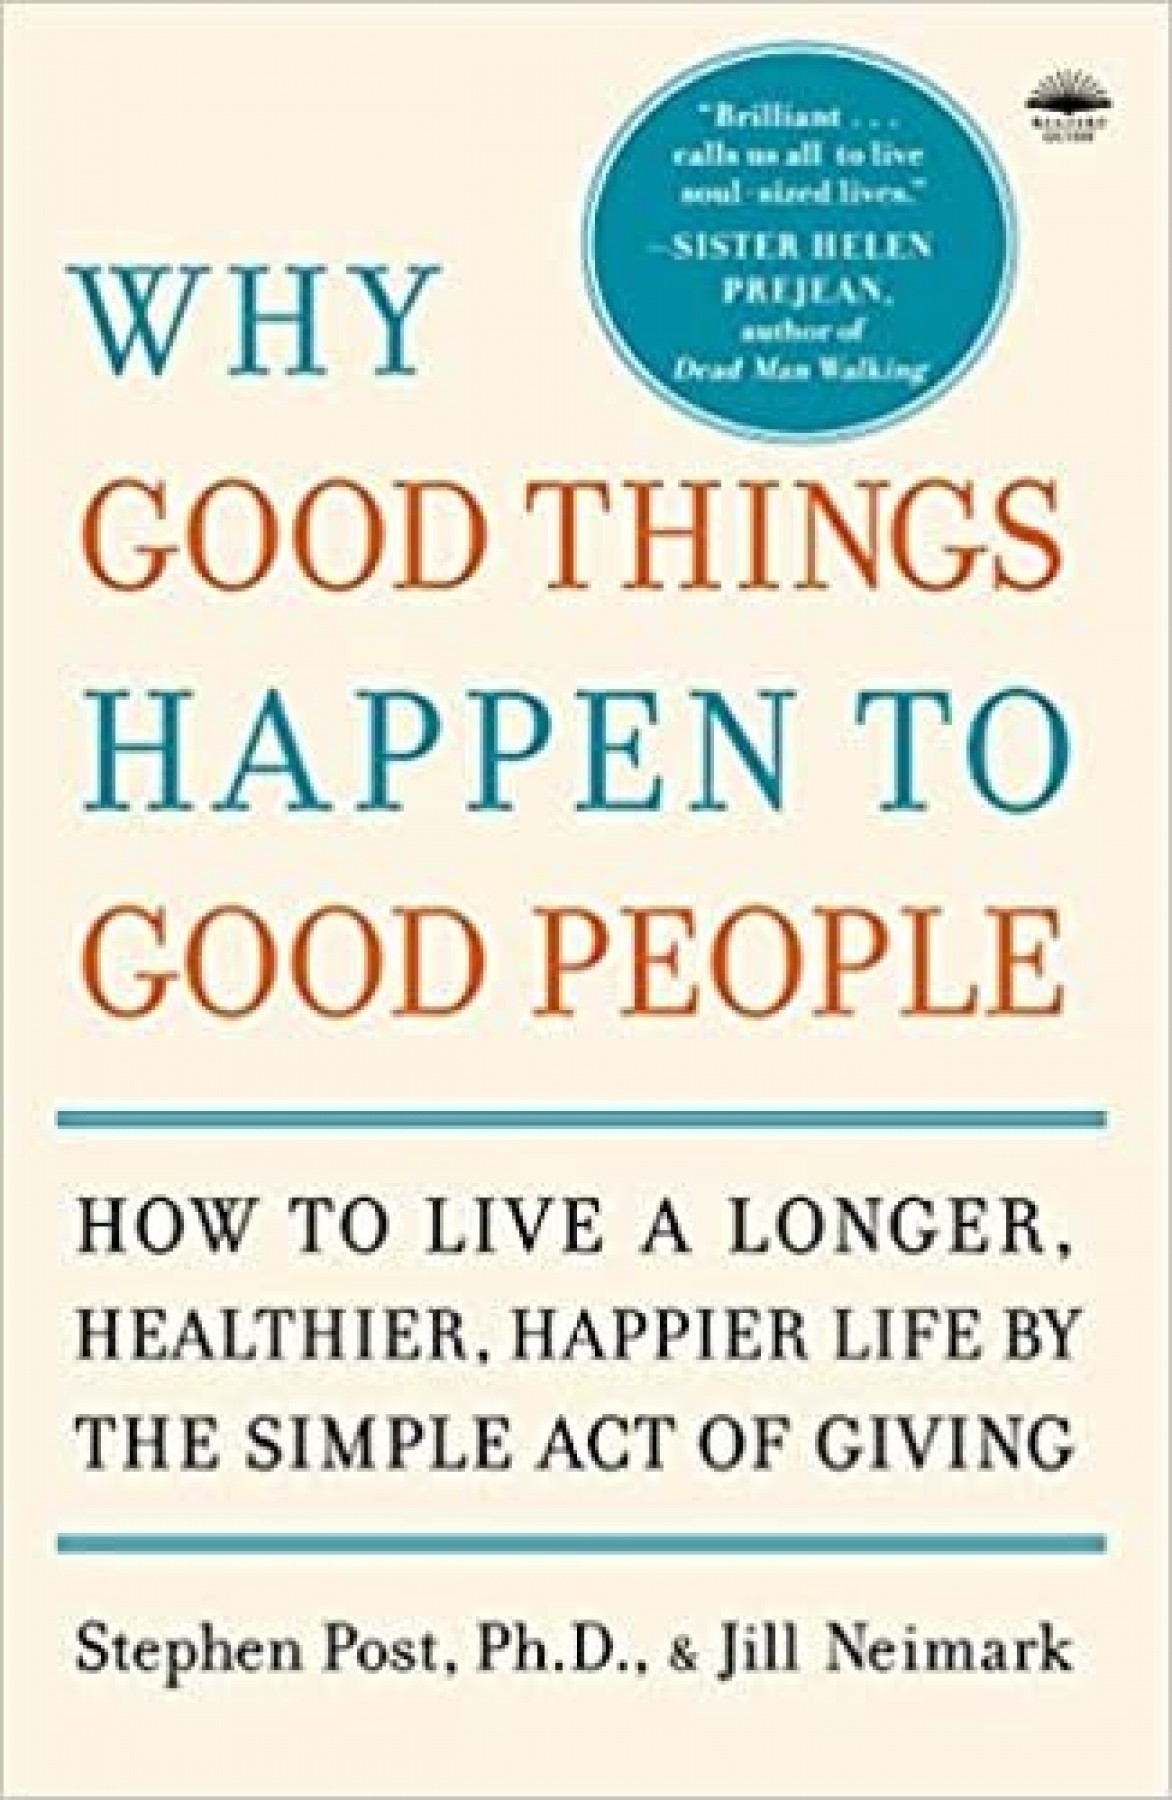 Why Good Things Happen to Good People: How to live a longer, healthier, happier life by the simple act of giving